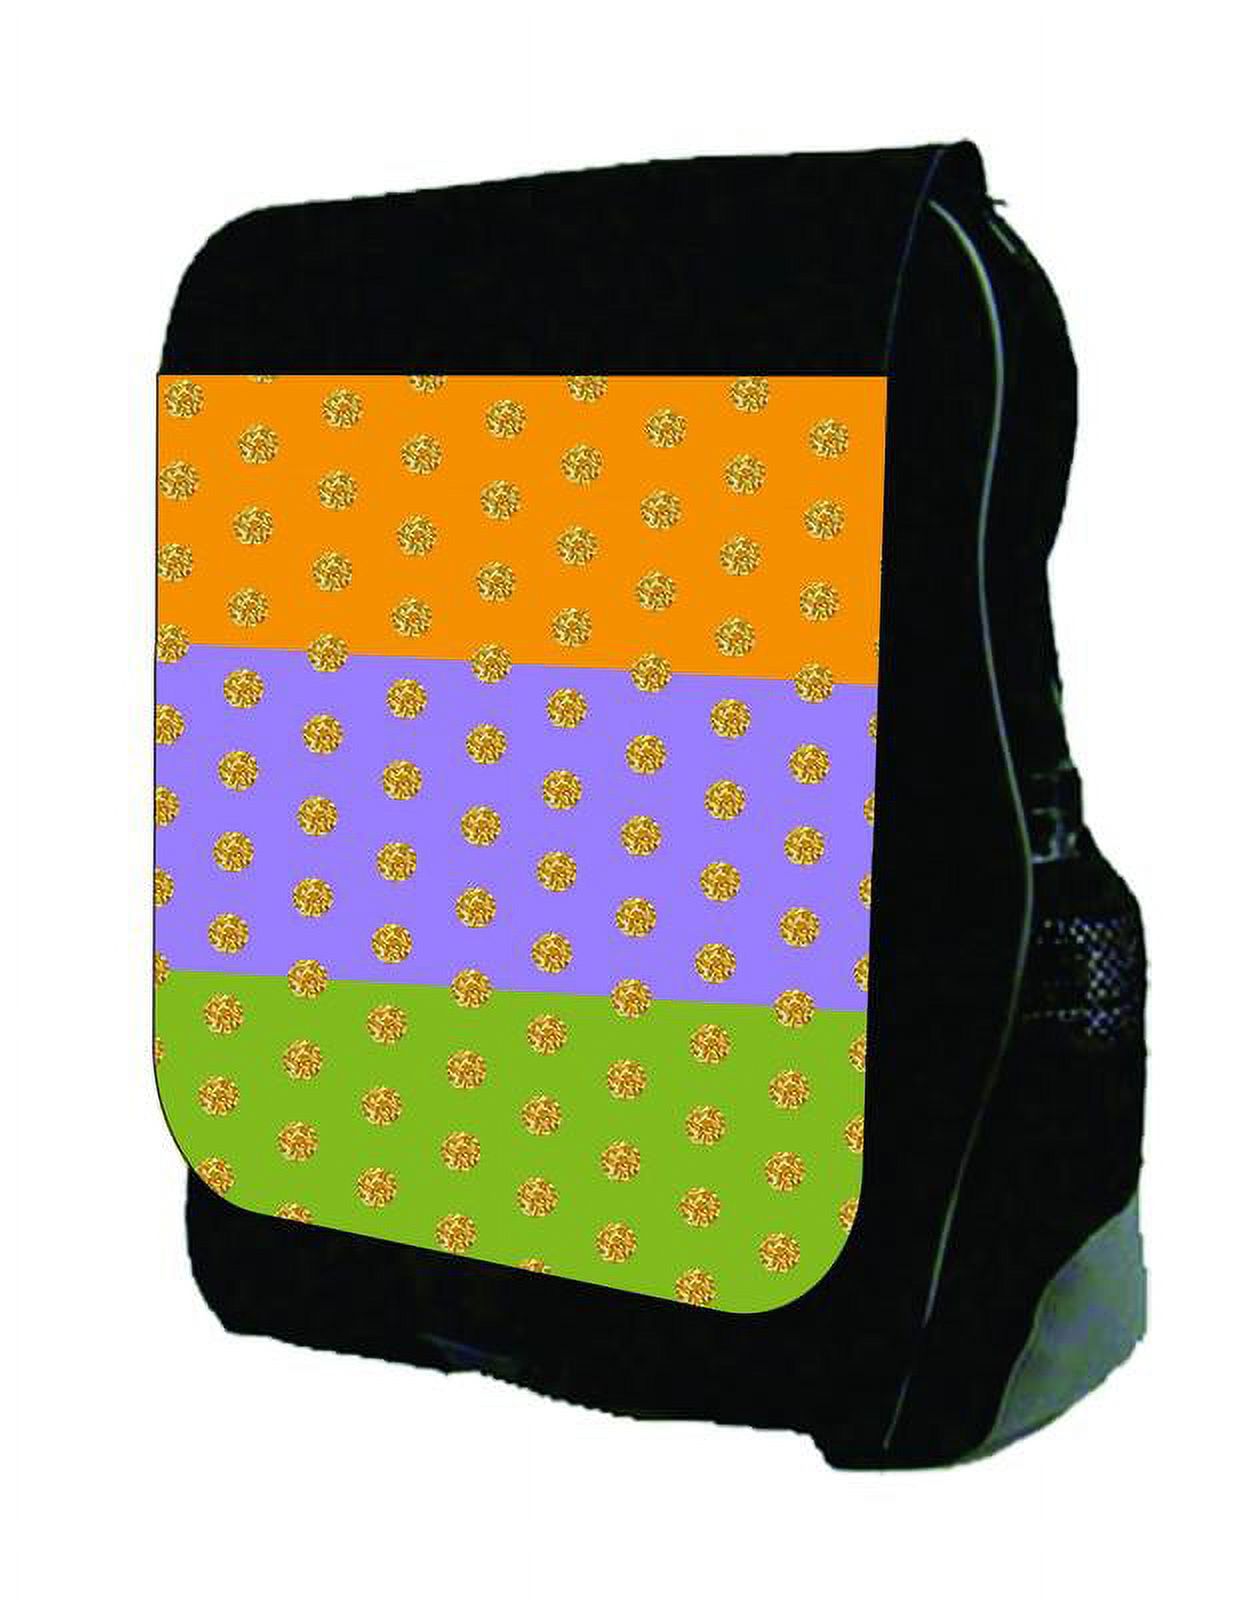 Colorblocked Orange, Purple, Lime Stripes with Gold Polka Dots - Black School Backpack - image 2 of 4